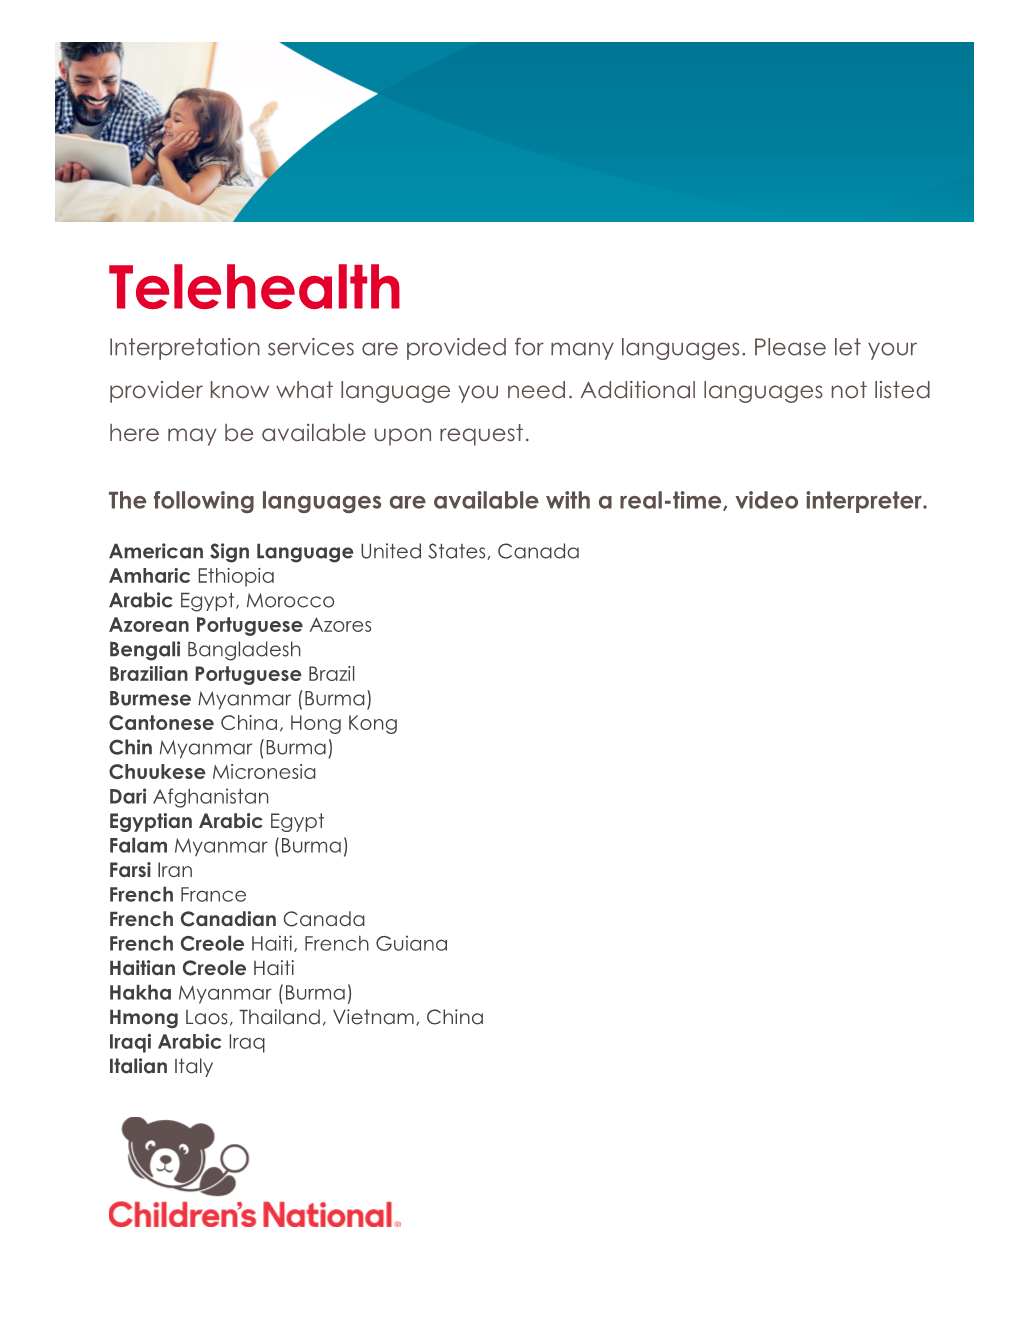 Telehealth Interpretation Services Are Provided for Many Languages